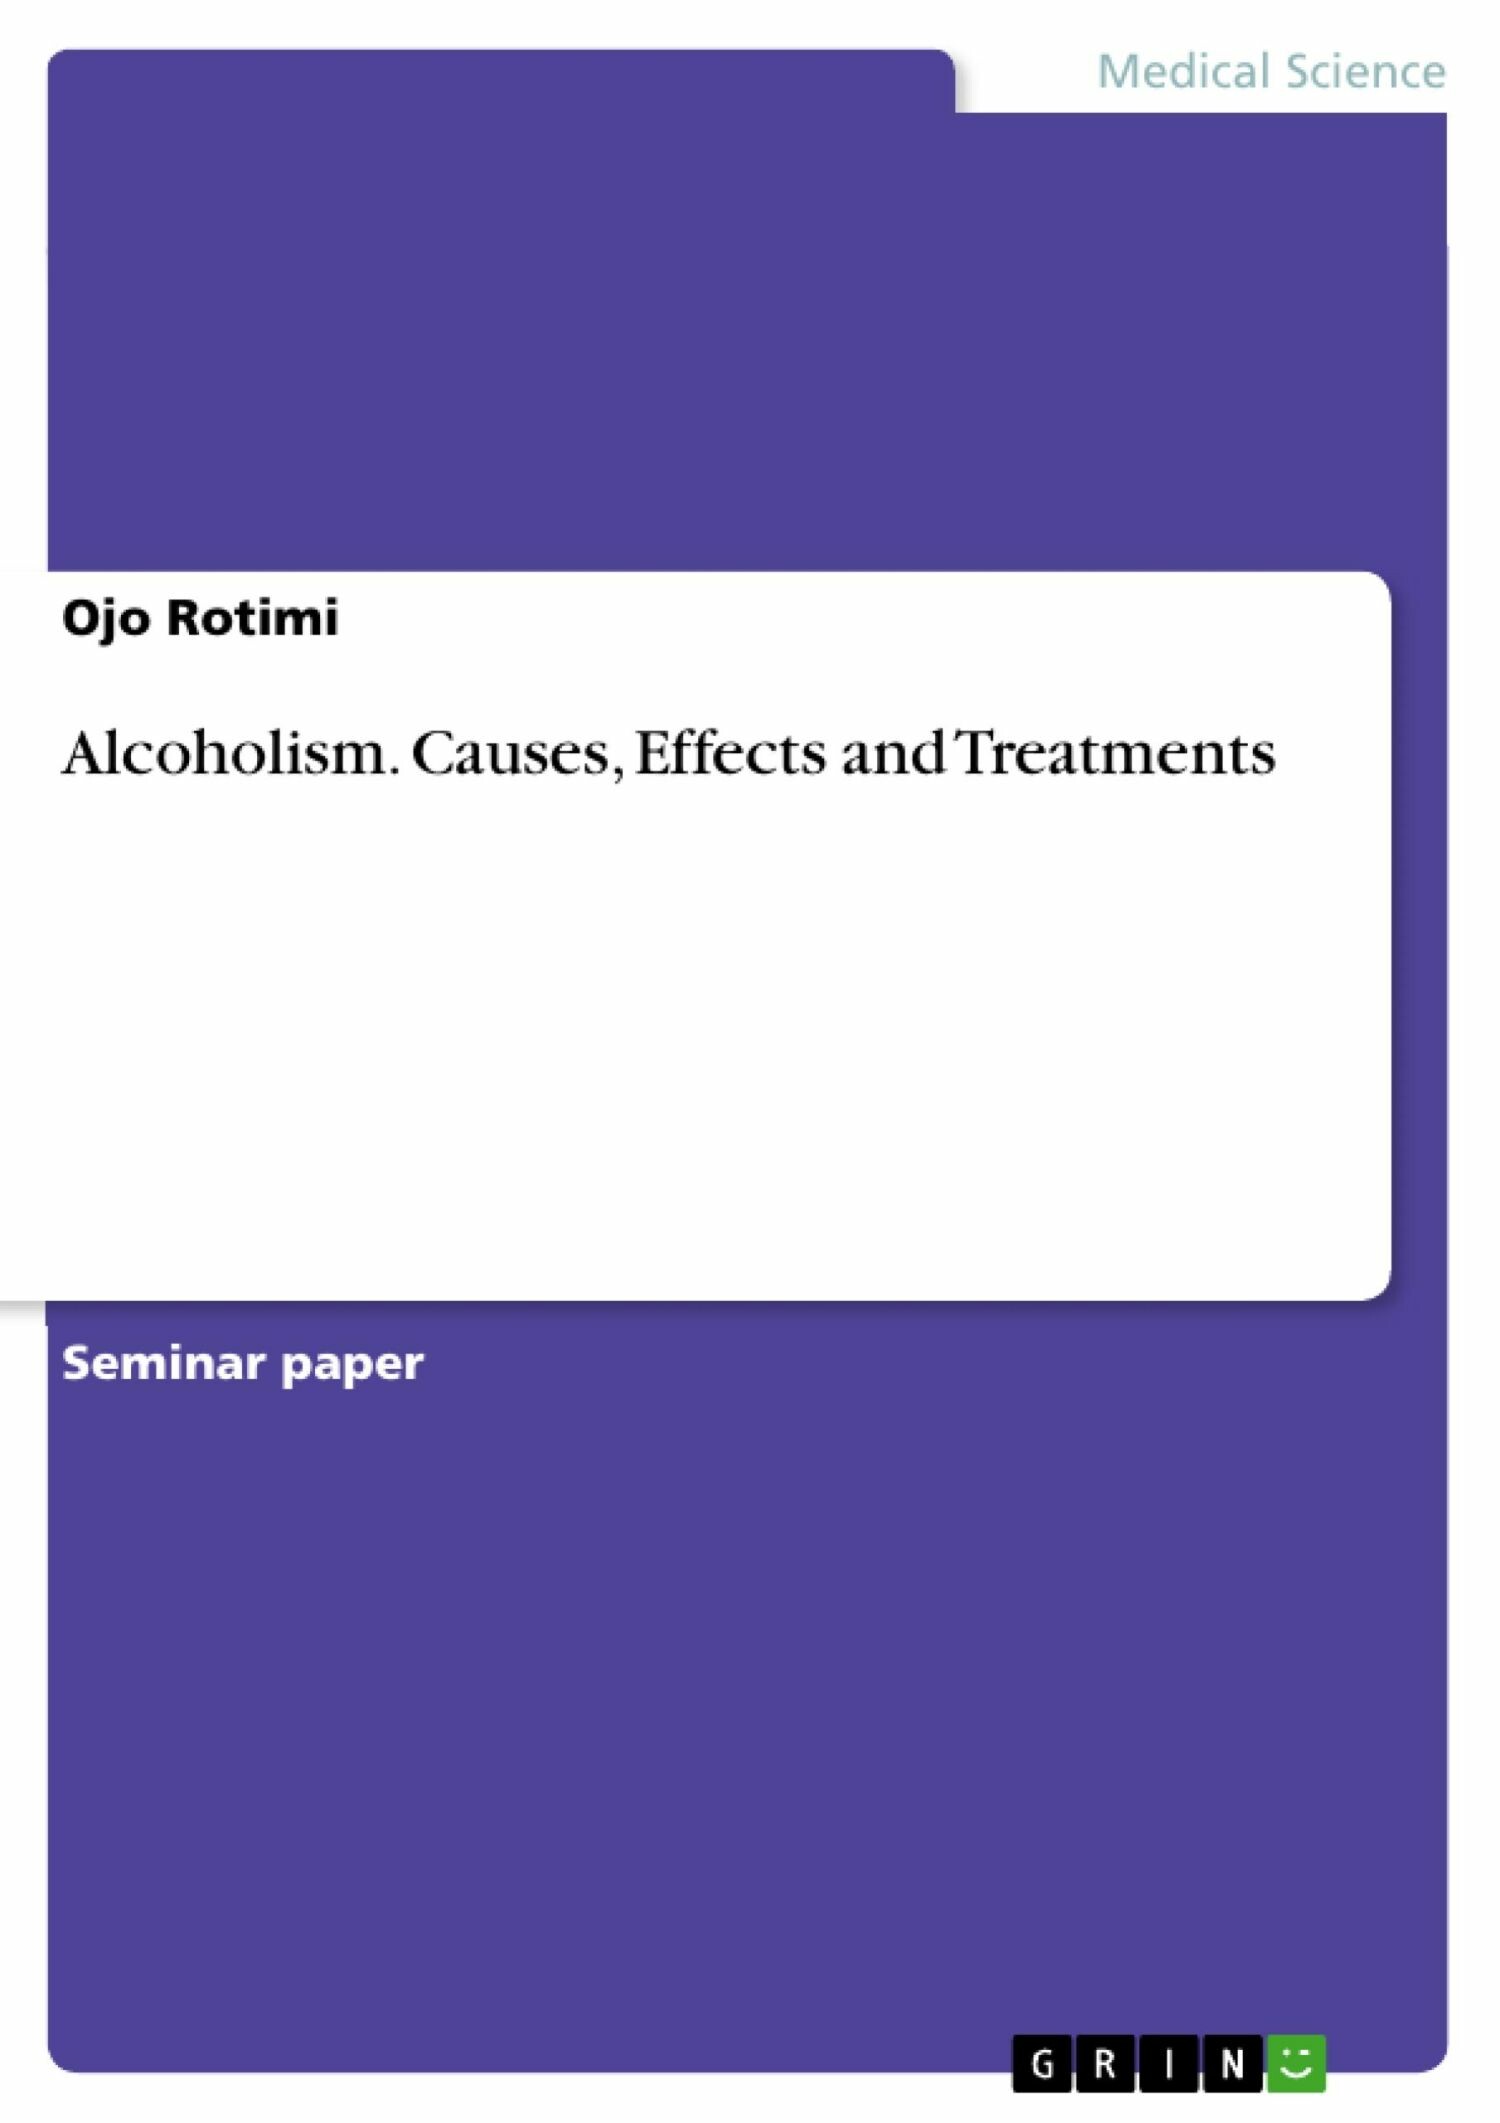 Alcoholism. Causes, Effects and Treatments